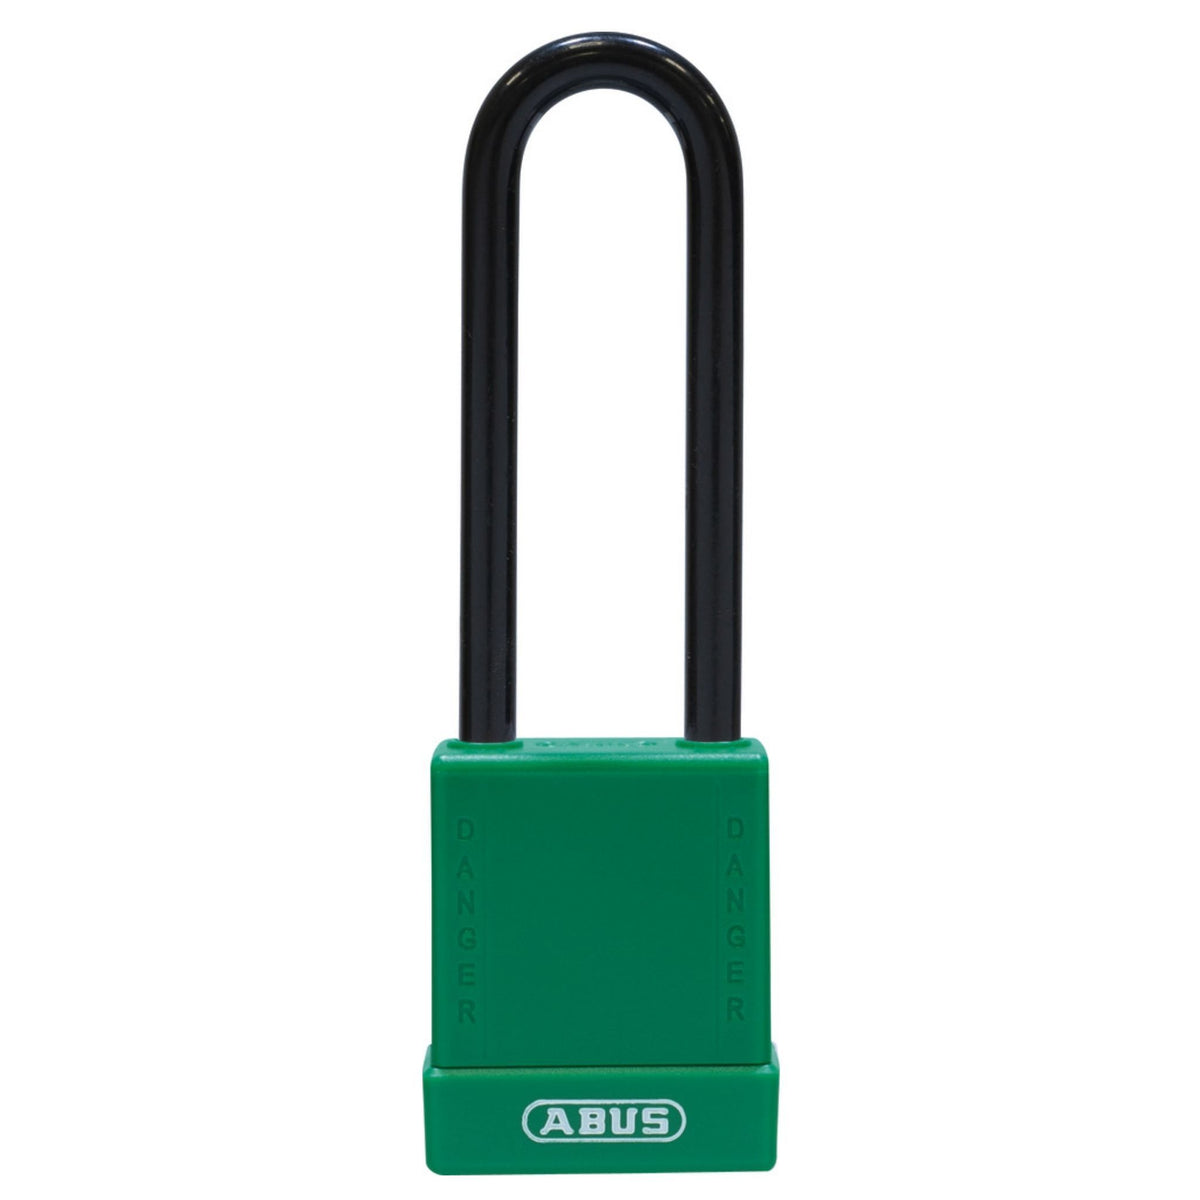 Abus 76/40HB 75 Green Lockout Tagout Safety Locks with 3-Inch Shackle - The Lock Source